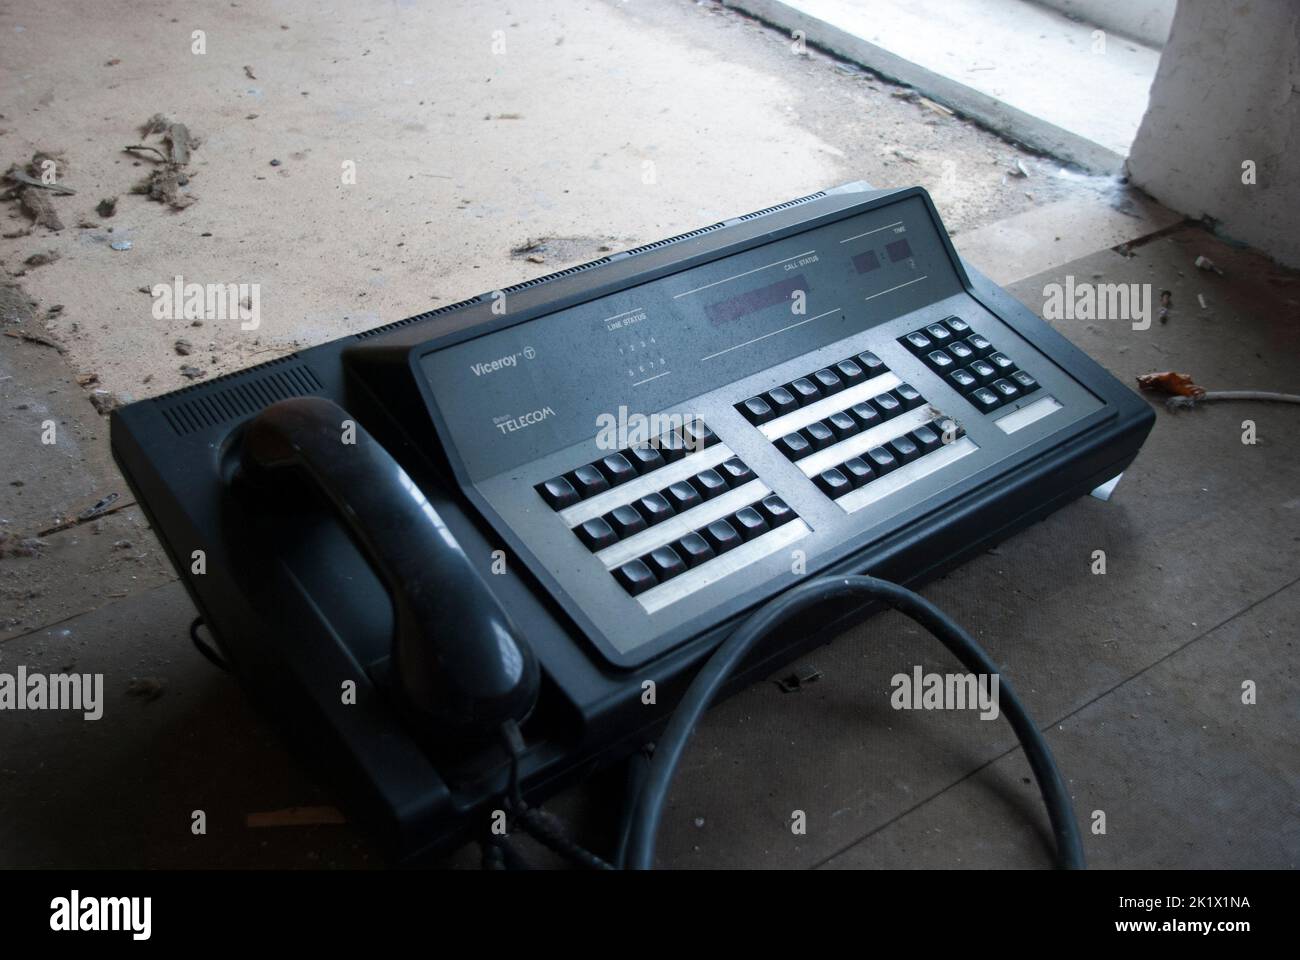 British Telecom Viceroy PBX telephone control local office exchange in an abandoned building. Stock Photo